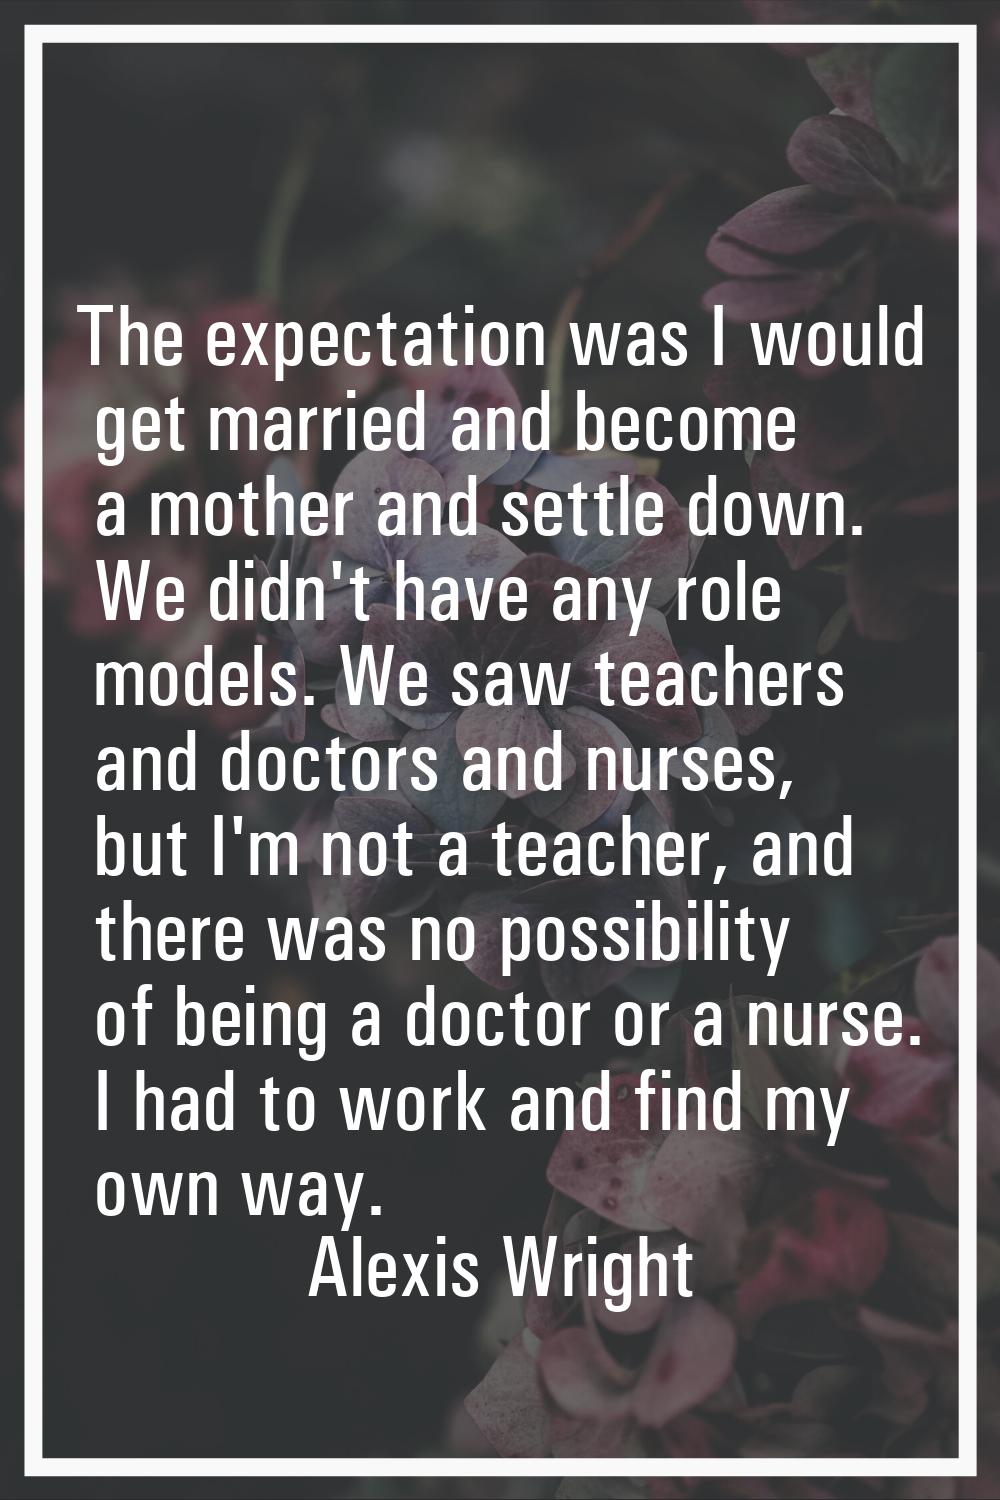 The expectation was I would get married and become a mother and settle down. We didn't have any rol